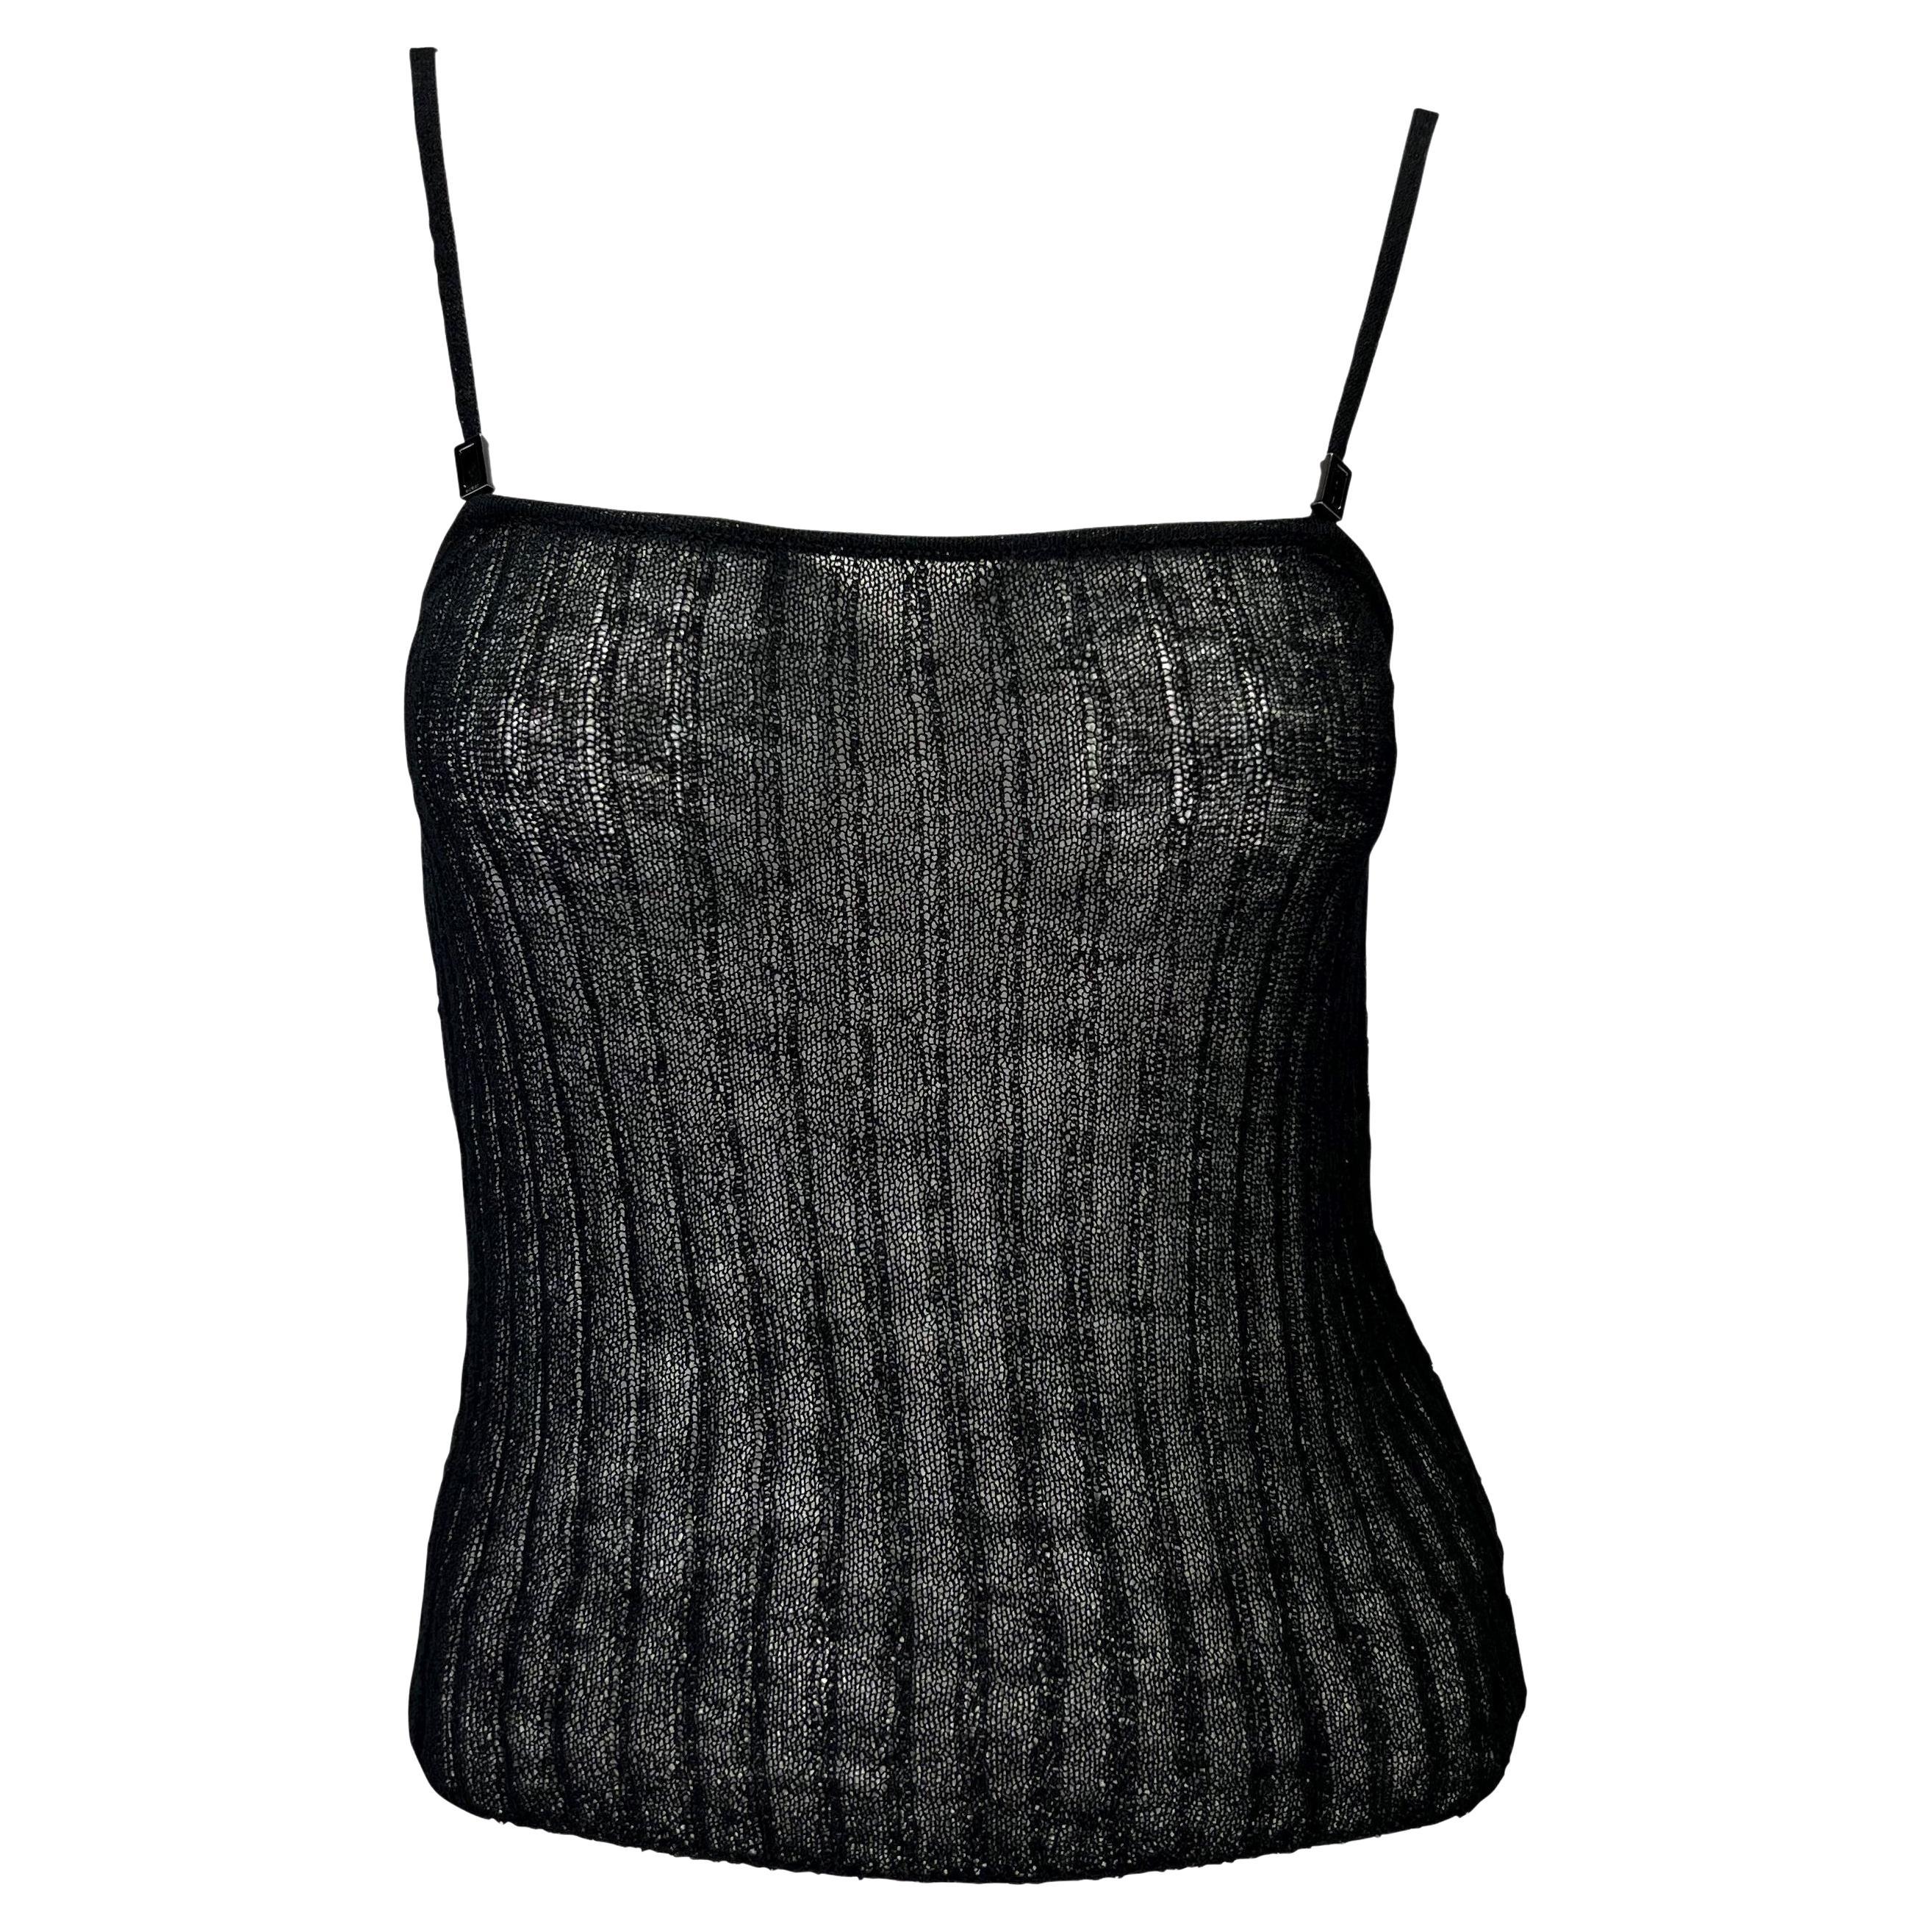 Presenting a black knit spaghetti strap Gucci tank top, designed by Tom Ford. From the Spring/Summer 1998 collection, this stunning tank top features a square neckline and moveable metal branded charms attached to the straps. Not your average tank